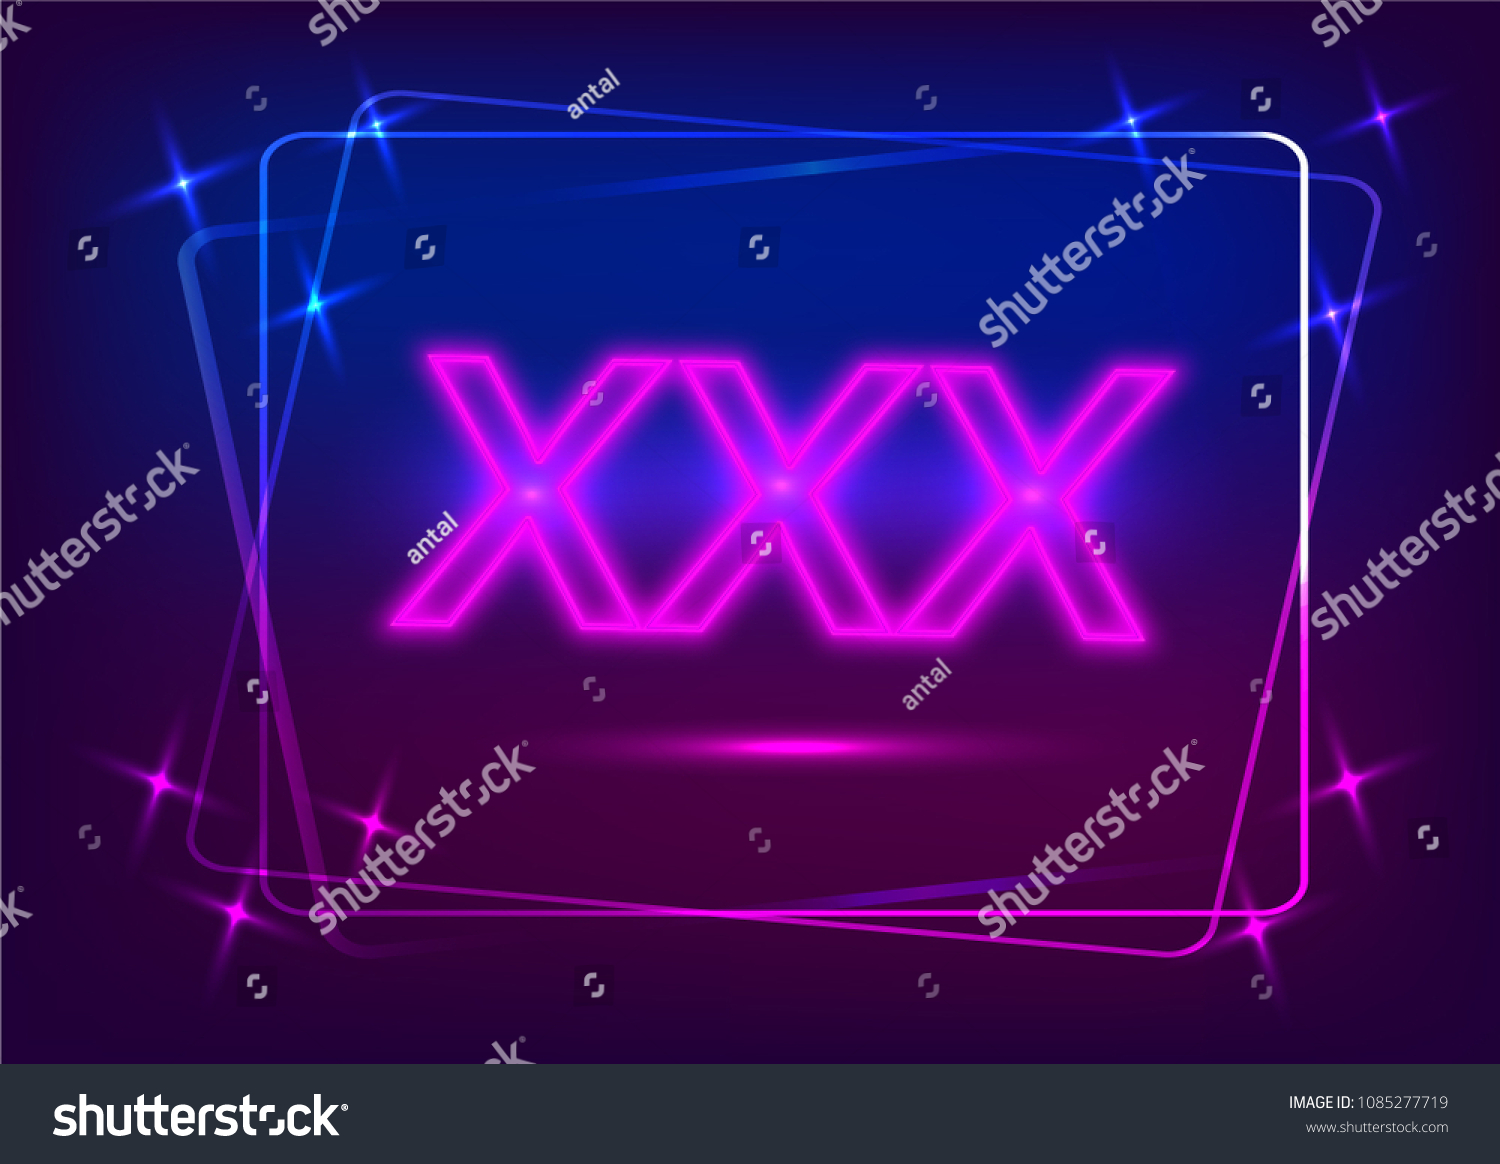 Vector Realistic Isolated Erotic Neon Sign Stock Vector Royalty Free 1085277719 Shutterstock 1187